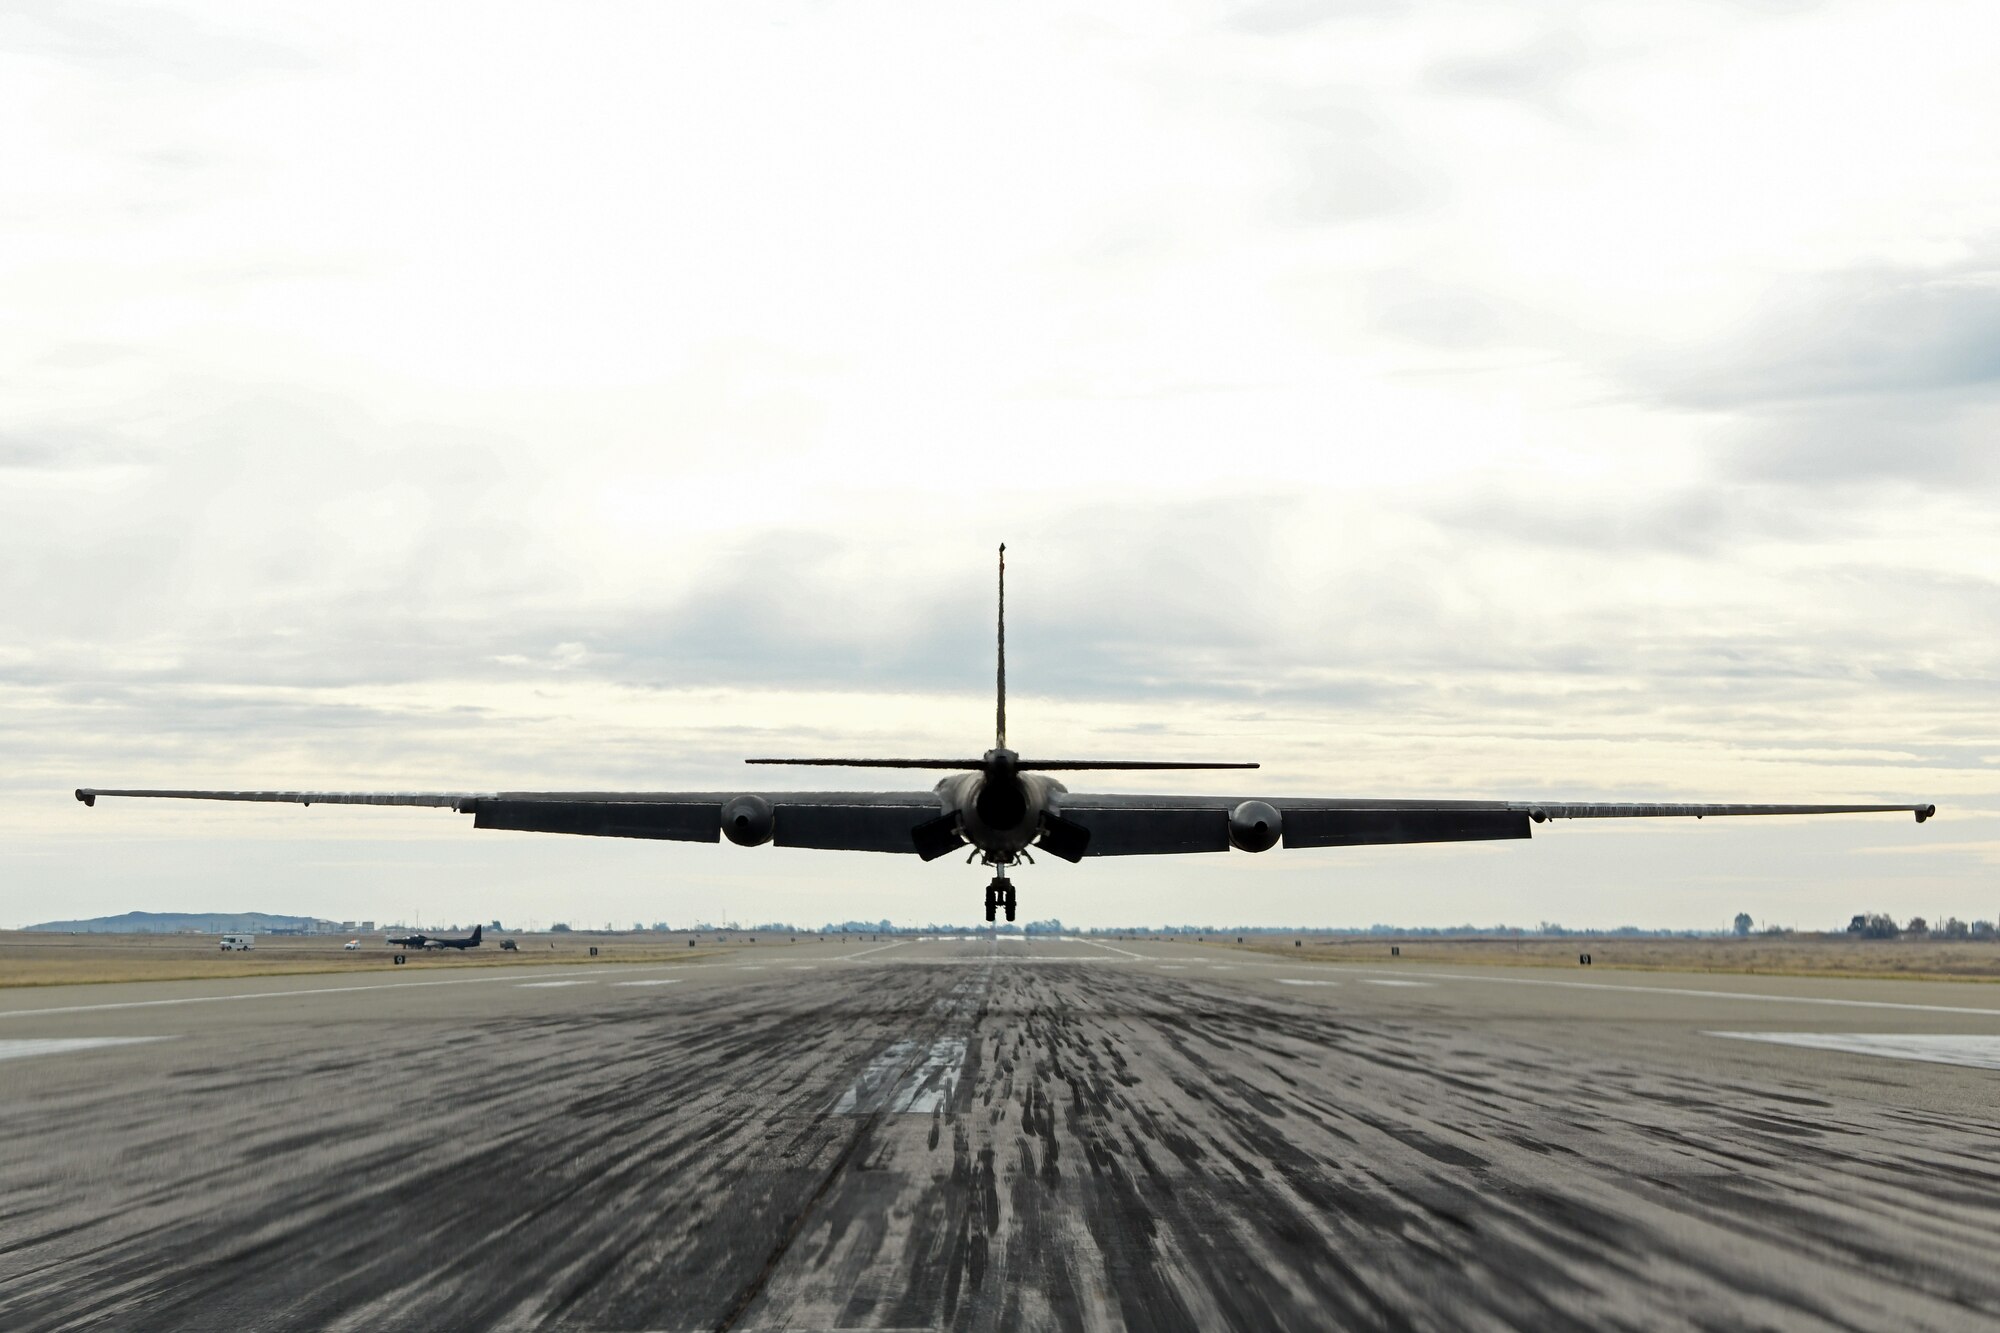 A U-2 Dragon Lady assigned to the 9th Reconnaissance Wing prepares to land at Beale Air Force, Calif., Dec. 15, 2020. This flight marks a major leap forward for national defense as artificial intelligence took flight aboard a military aircraft for the first time in the history of the Department of Defense. The AI algorithm, developed by Air Combat Command’s U-2 Federal Laboratory, trained the AI to execute specific in-flight tasks that would otherwise be done by the pilot. The flight was part of a specifically constructed scenario pitting the AI against another dynamic computer algorithm in order to prove both the new technology capability, and its ability to work in coordination with a human. (U.S. Air Force photo by Airman 1st Class Luis A. Ruiz-Vazquez)